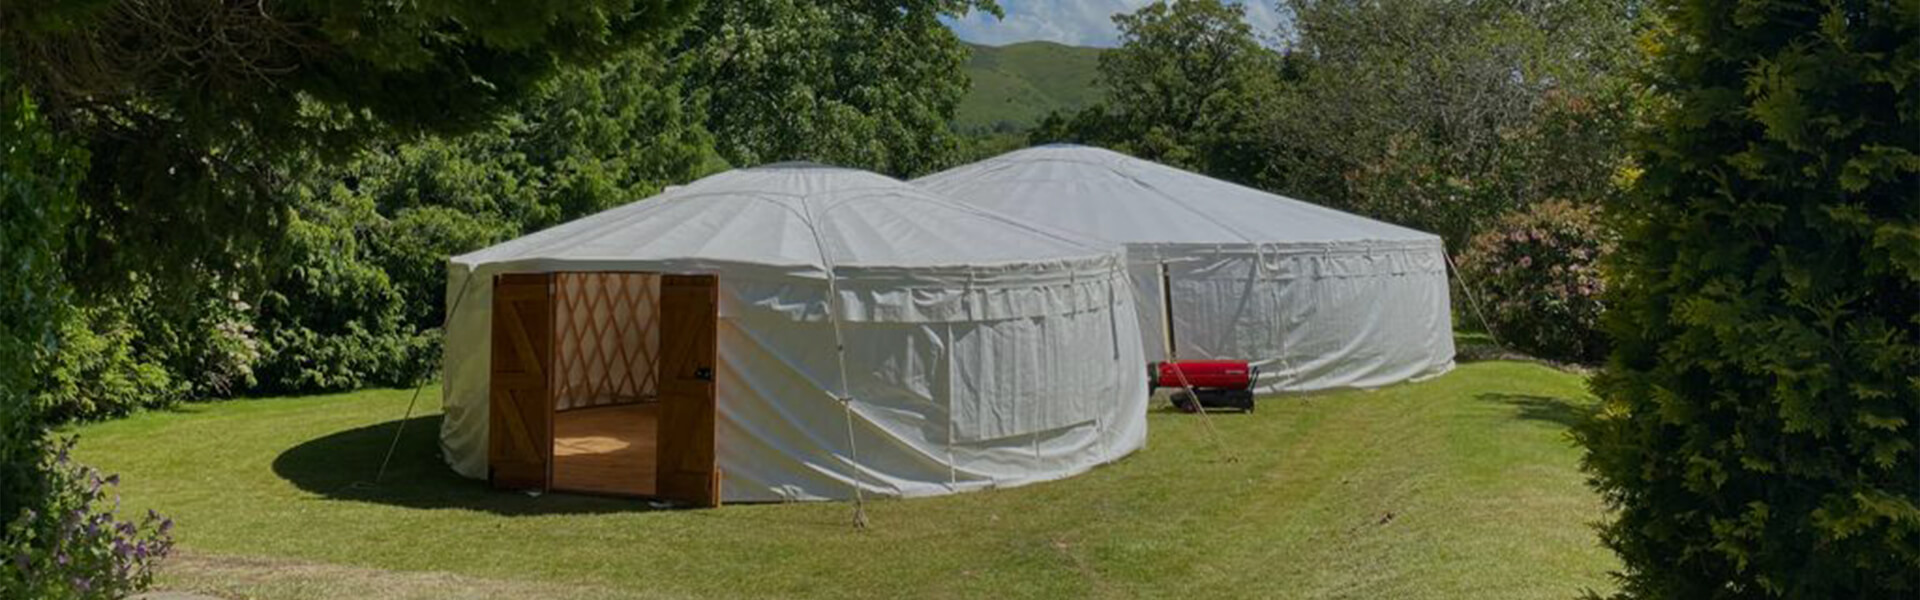 Two Yurts in an enclosed field